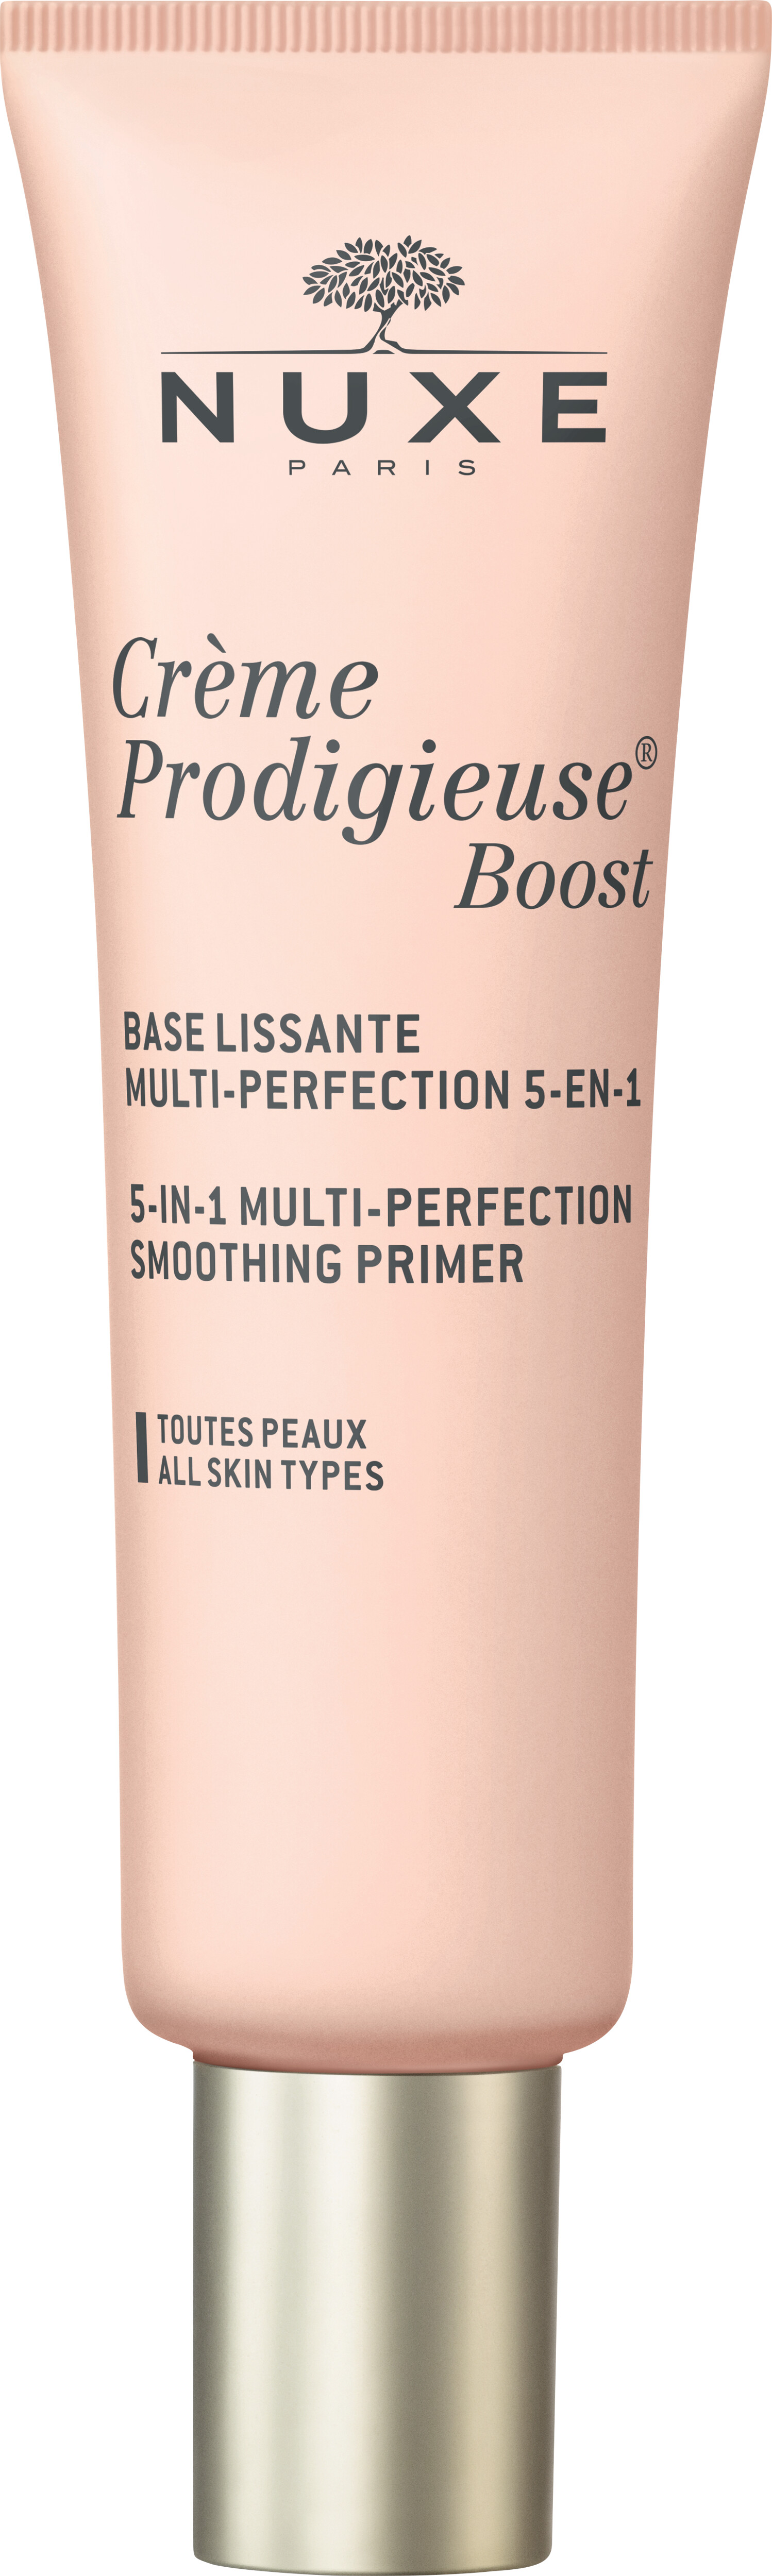 Nuxe Creme Prodigieuse Boost 5-in-1 Multi-Perfection Smoothing Primer 30ml